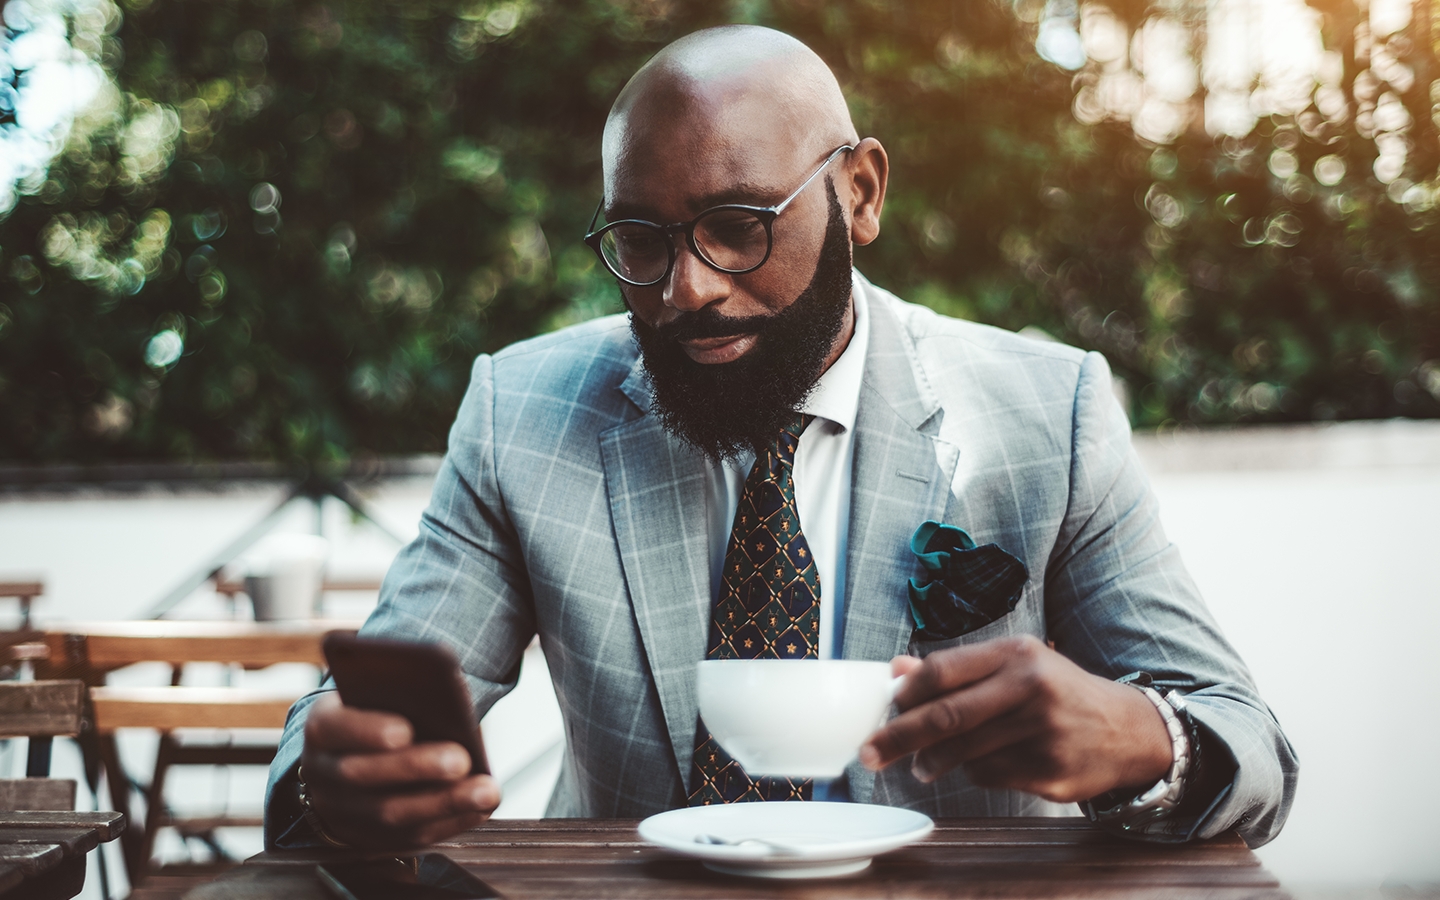 African American man in suit looking at phone over coffee.